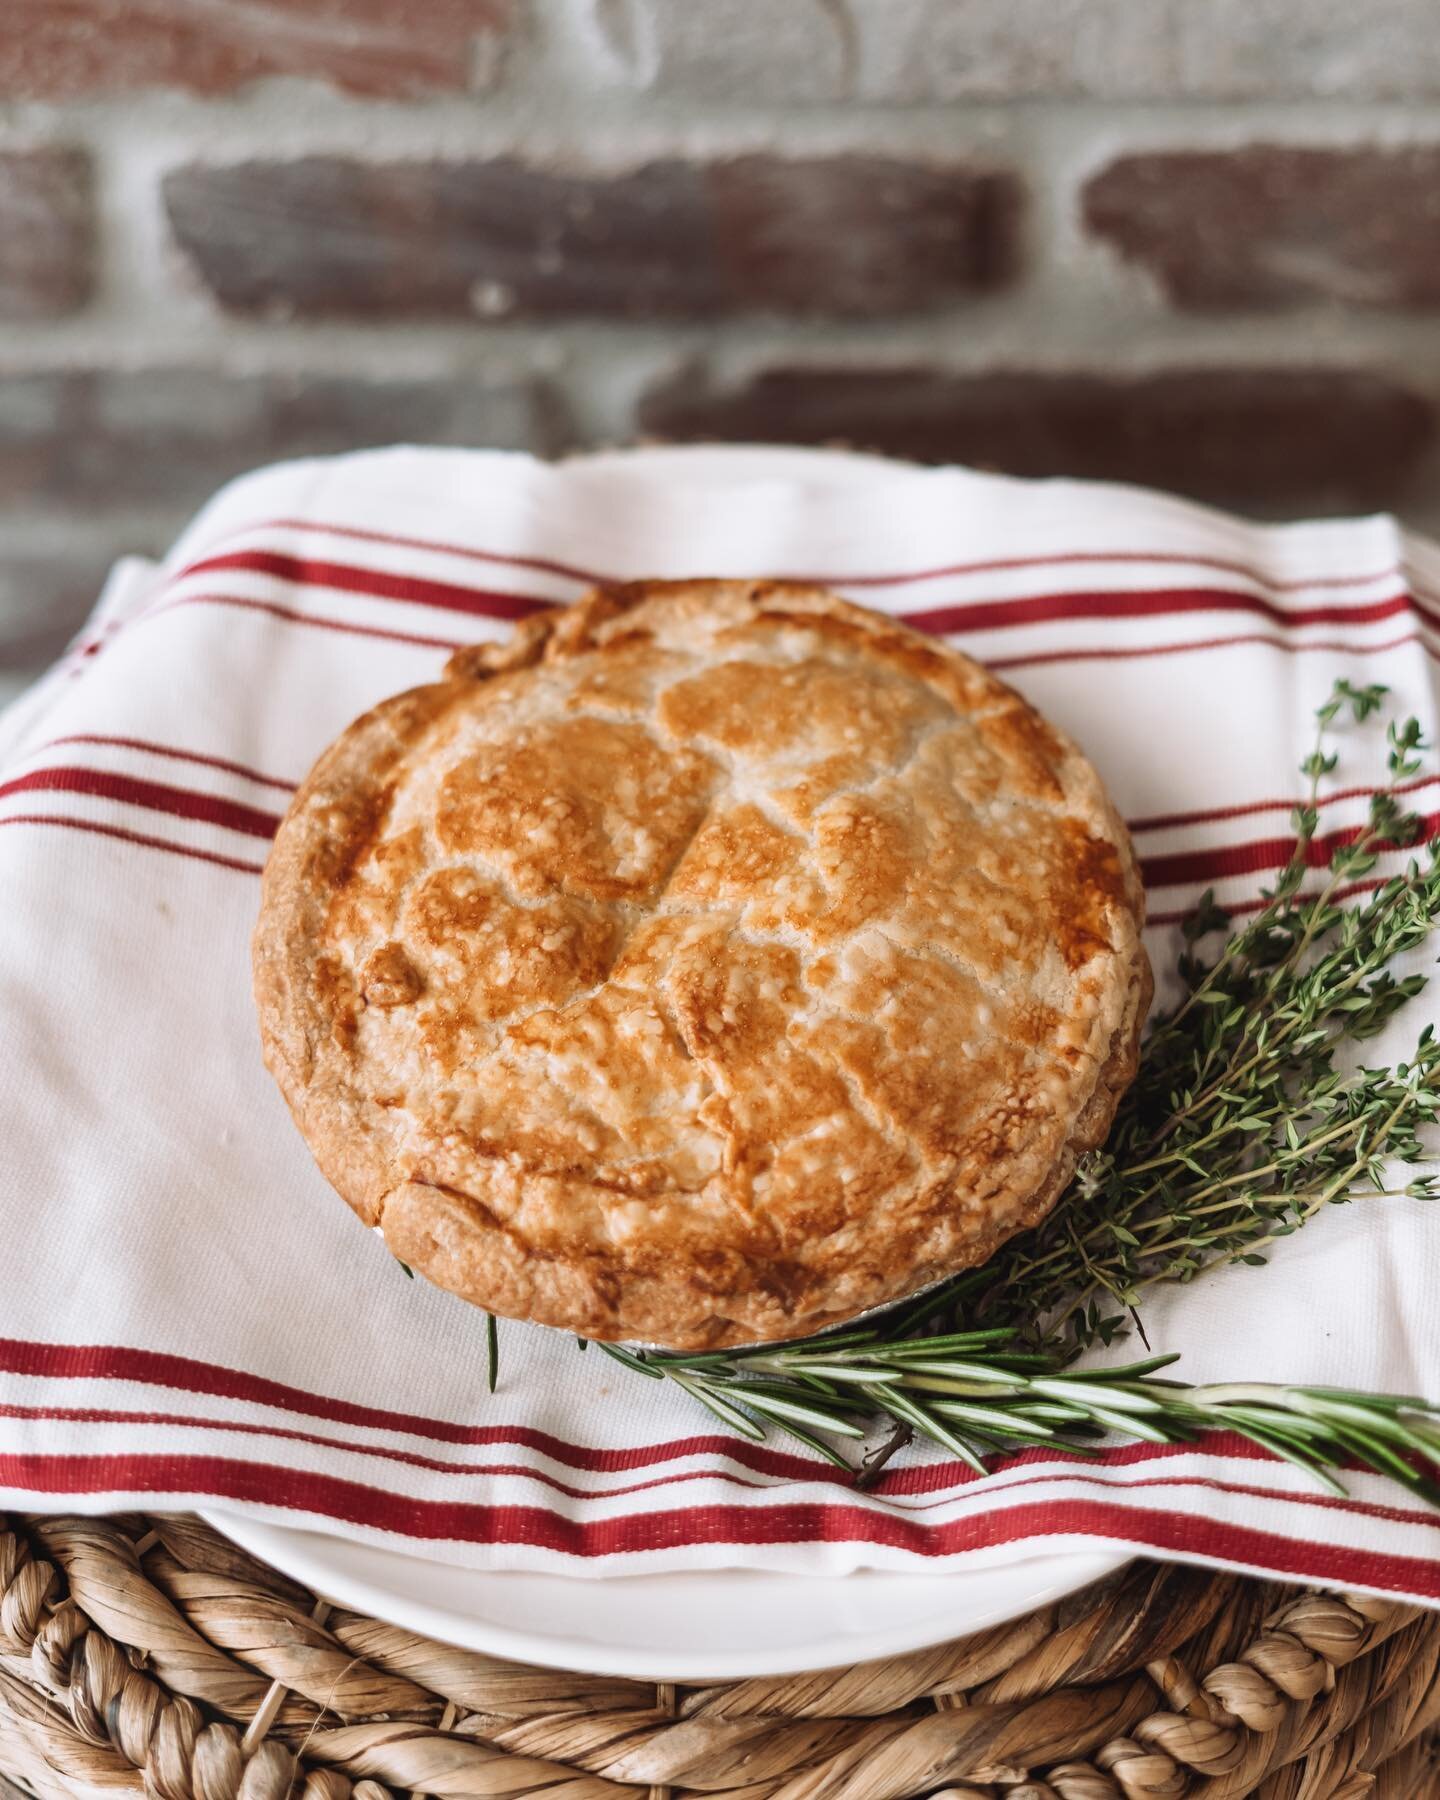 New additions this week!!

	1.	Amazing Chicken Pot Pie and Shepherd&rsquo;s Pie on our Chef&rsquo;s table
	2.	Fresh eggs from Authenticity Farms! 

Located in Amelia, Va, Authenticity Farms&hellip;
	&bull;	gives all their animals a grass based diet
	